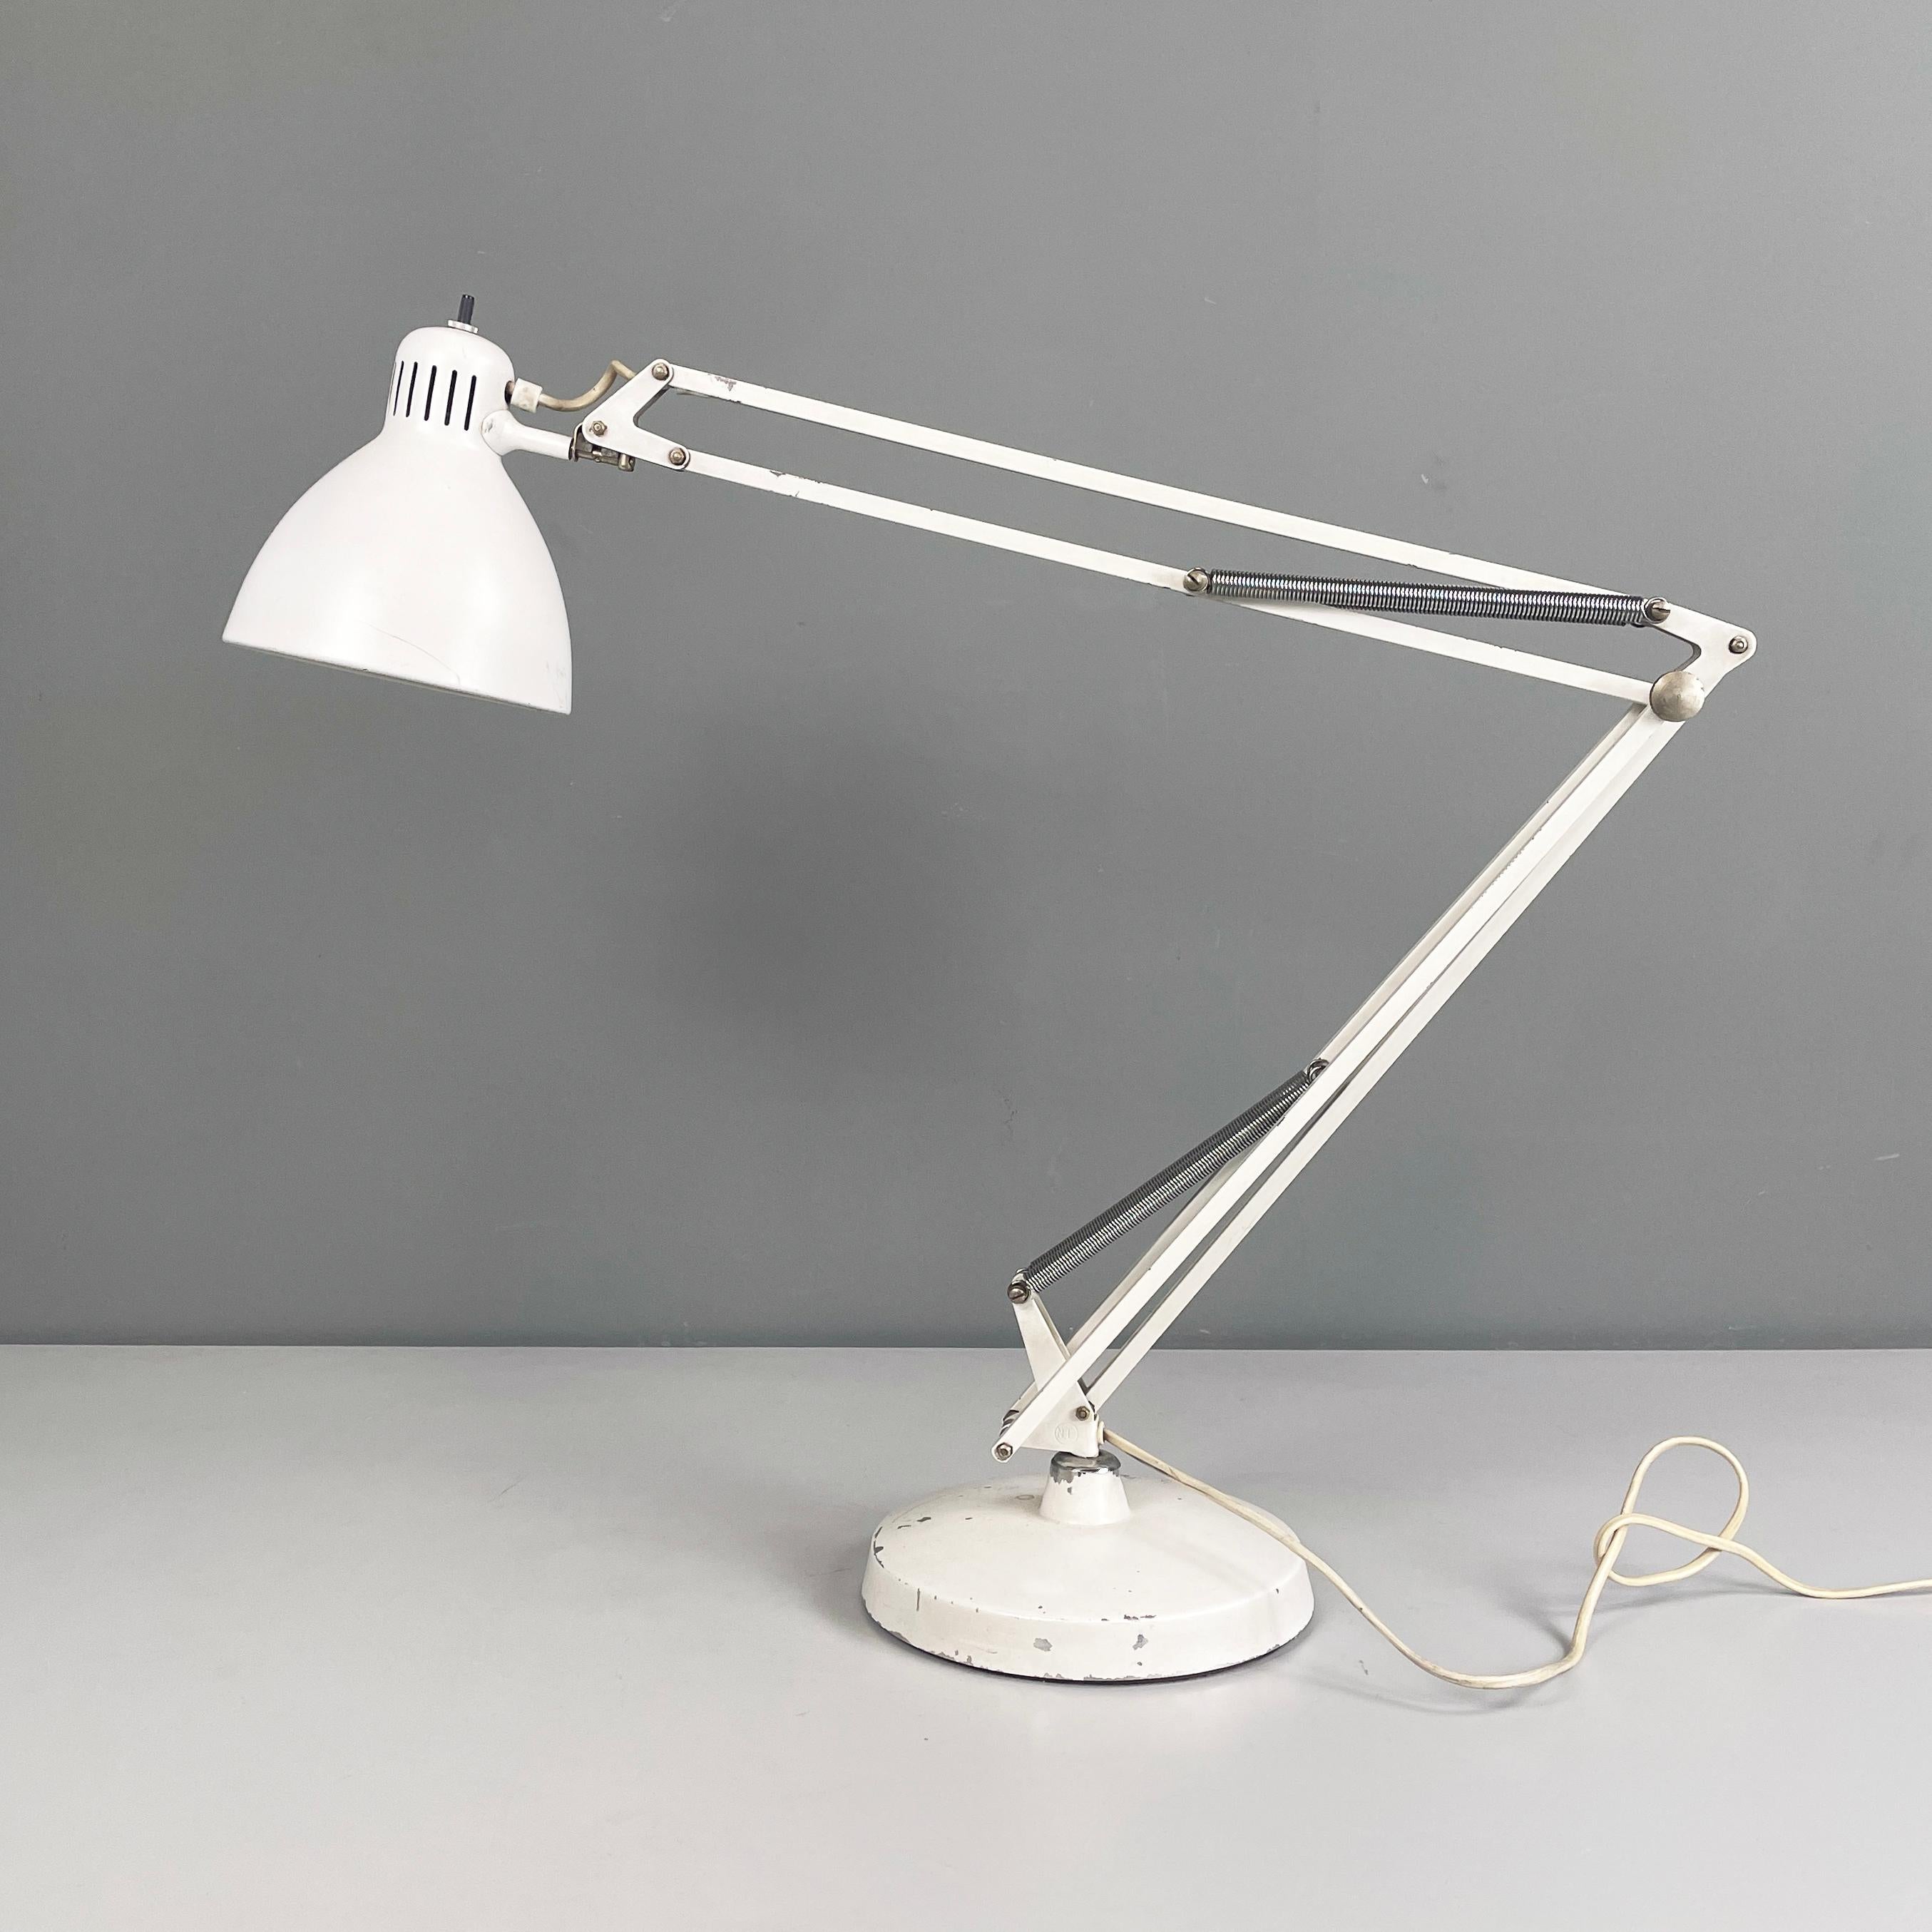 Italian mid-century modern Adjustable table lamp Naska Loris by Jac Jacobsen for Luxo, 1950s
Table lamp mod. Naska Loris with round base, entirely in white enamelled metal. The conical-shaped adjustable lampshade features a black switch. The